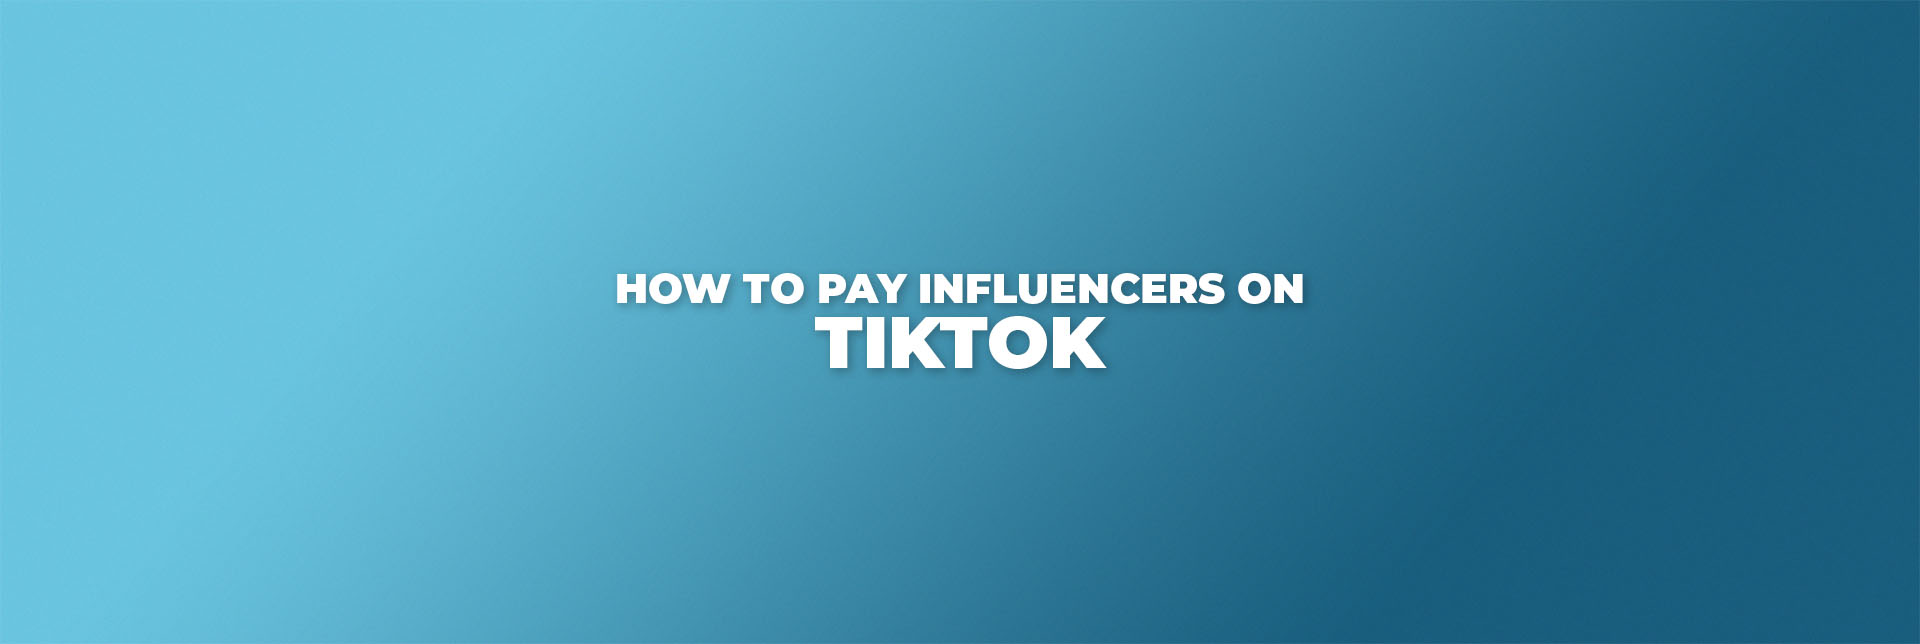 How to Pay Influencers on TikTok